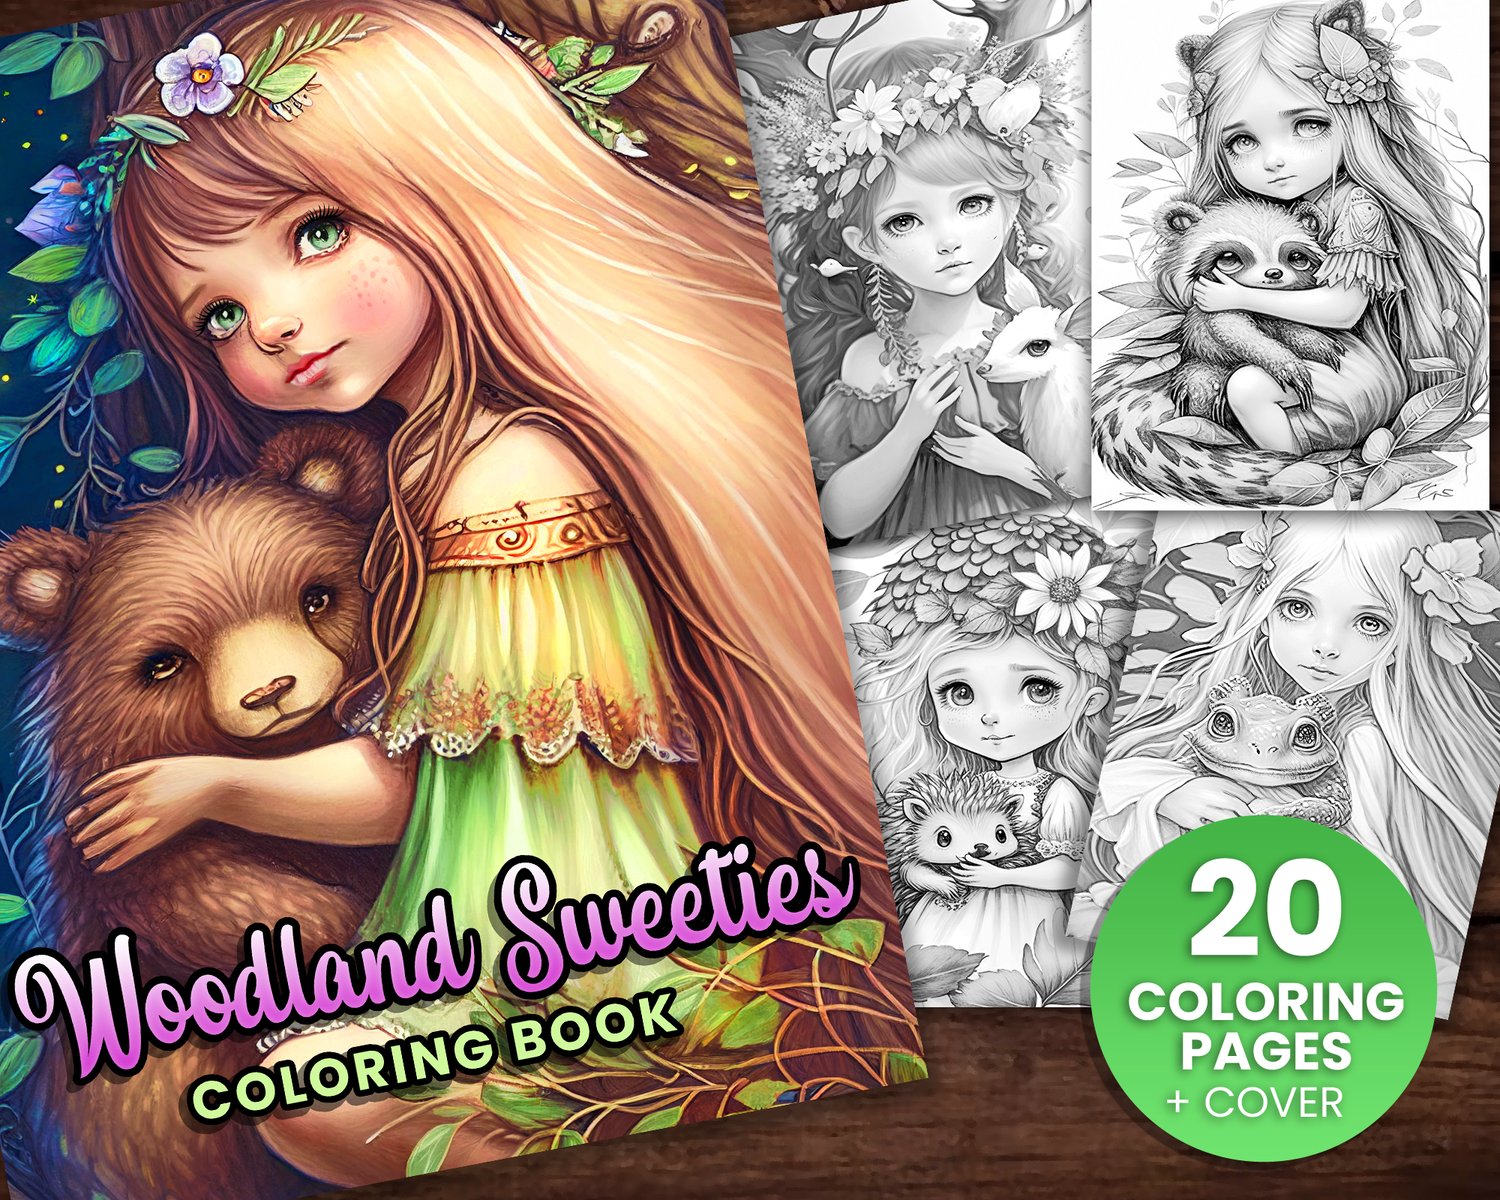 20 Woodland Sweeties Animals & Girls Fantasy Anime Coloring Page, Adults  kids- Download - Grayscale Coloring Page - Gift, Printable PDF - Payhip